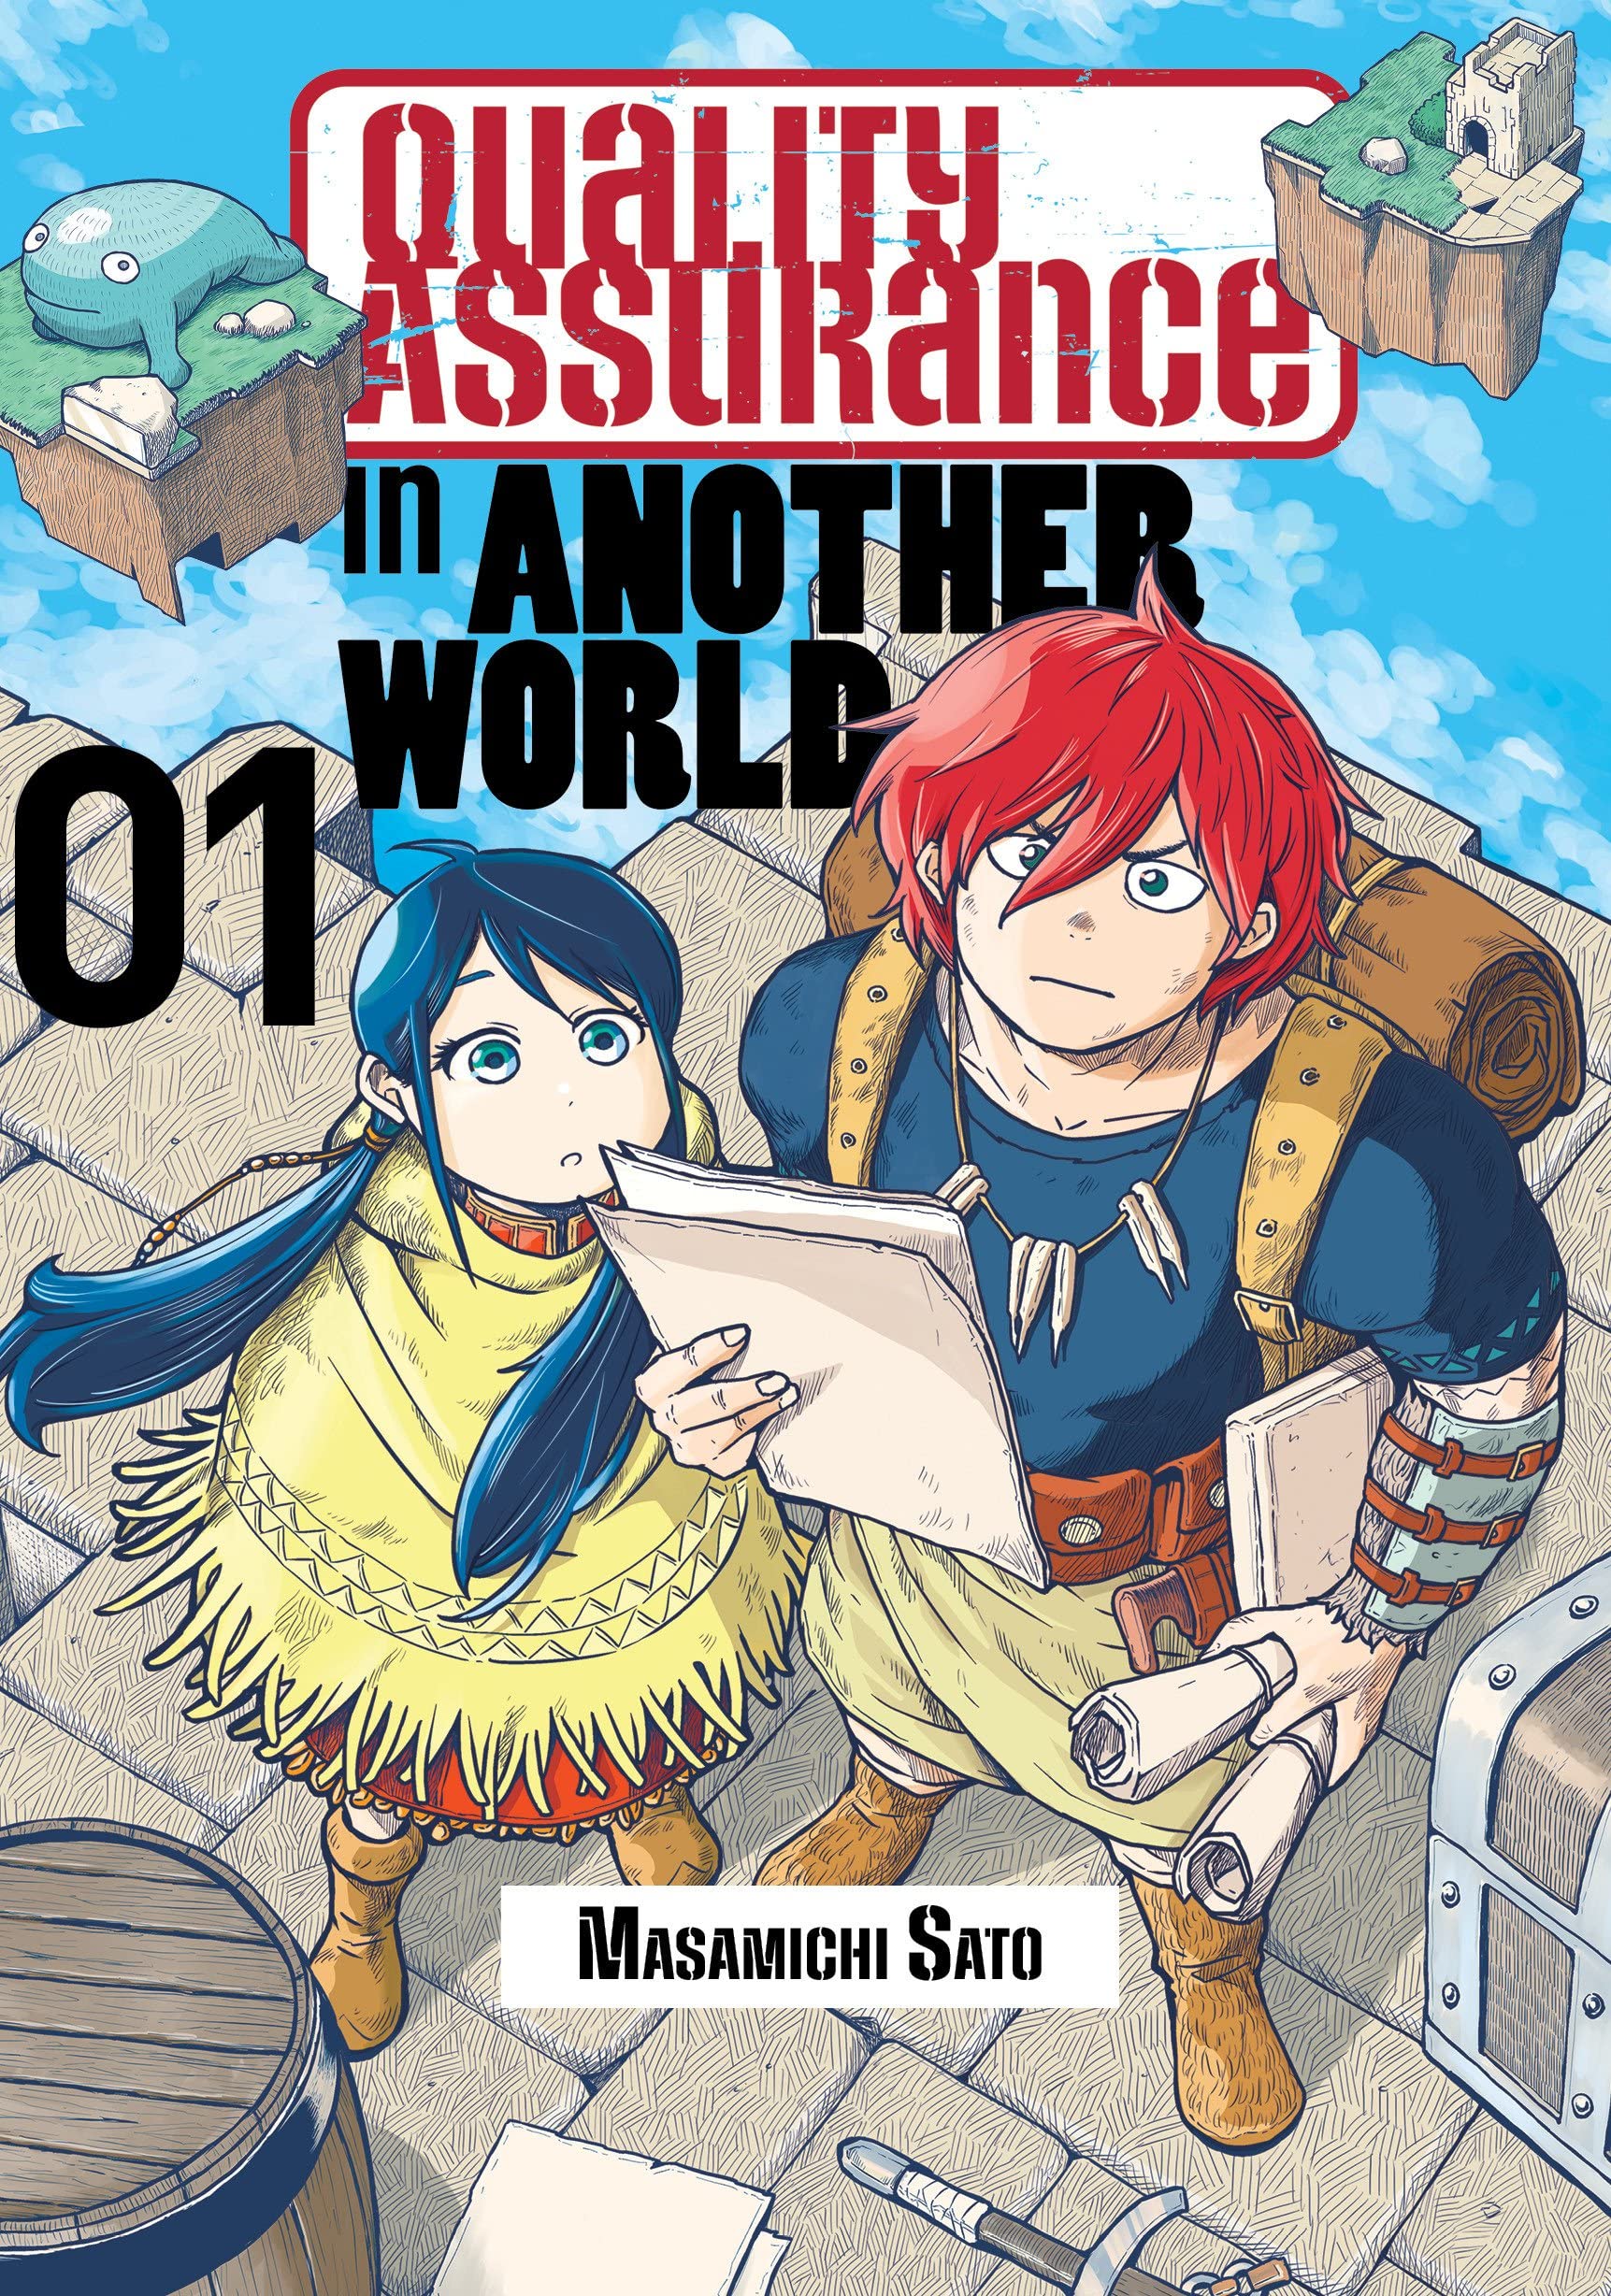 Quality Assurance in Another World Vol. 01